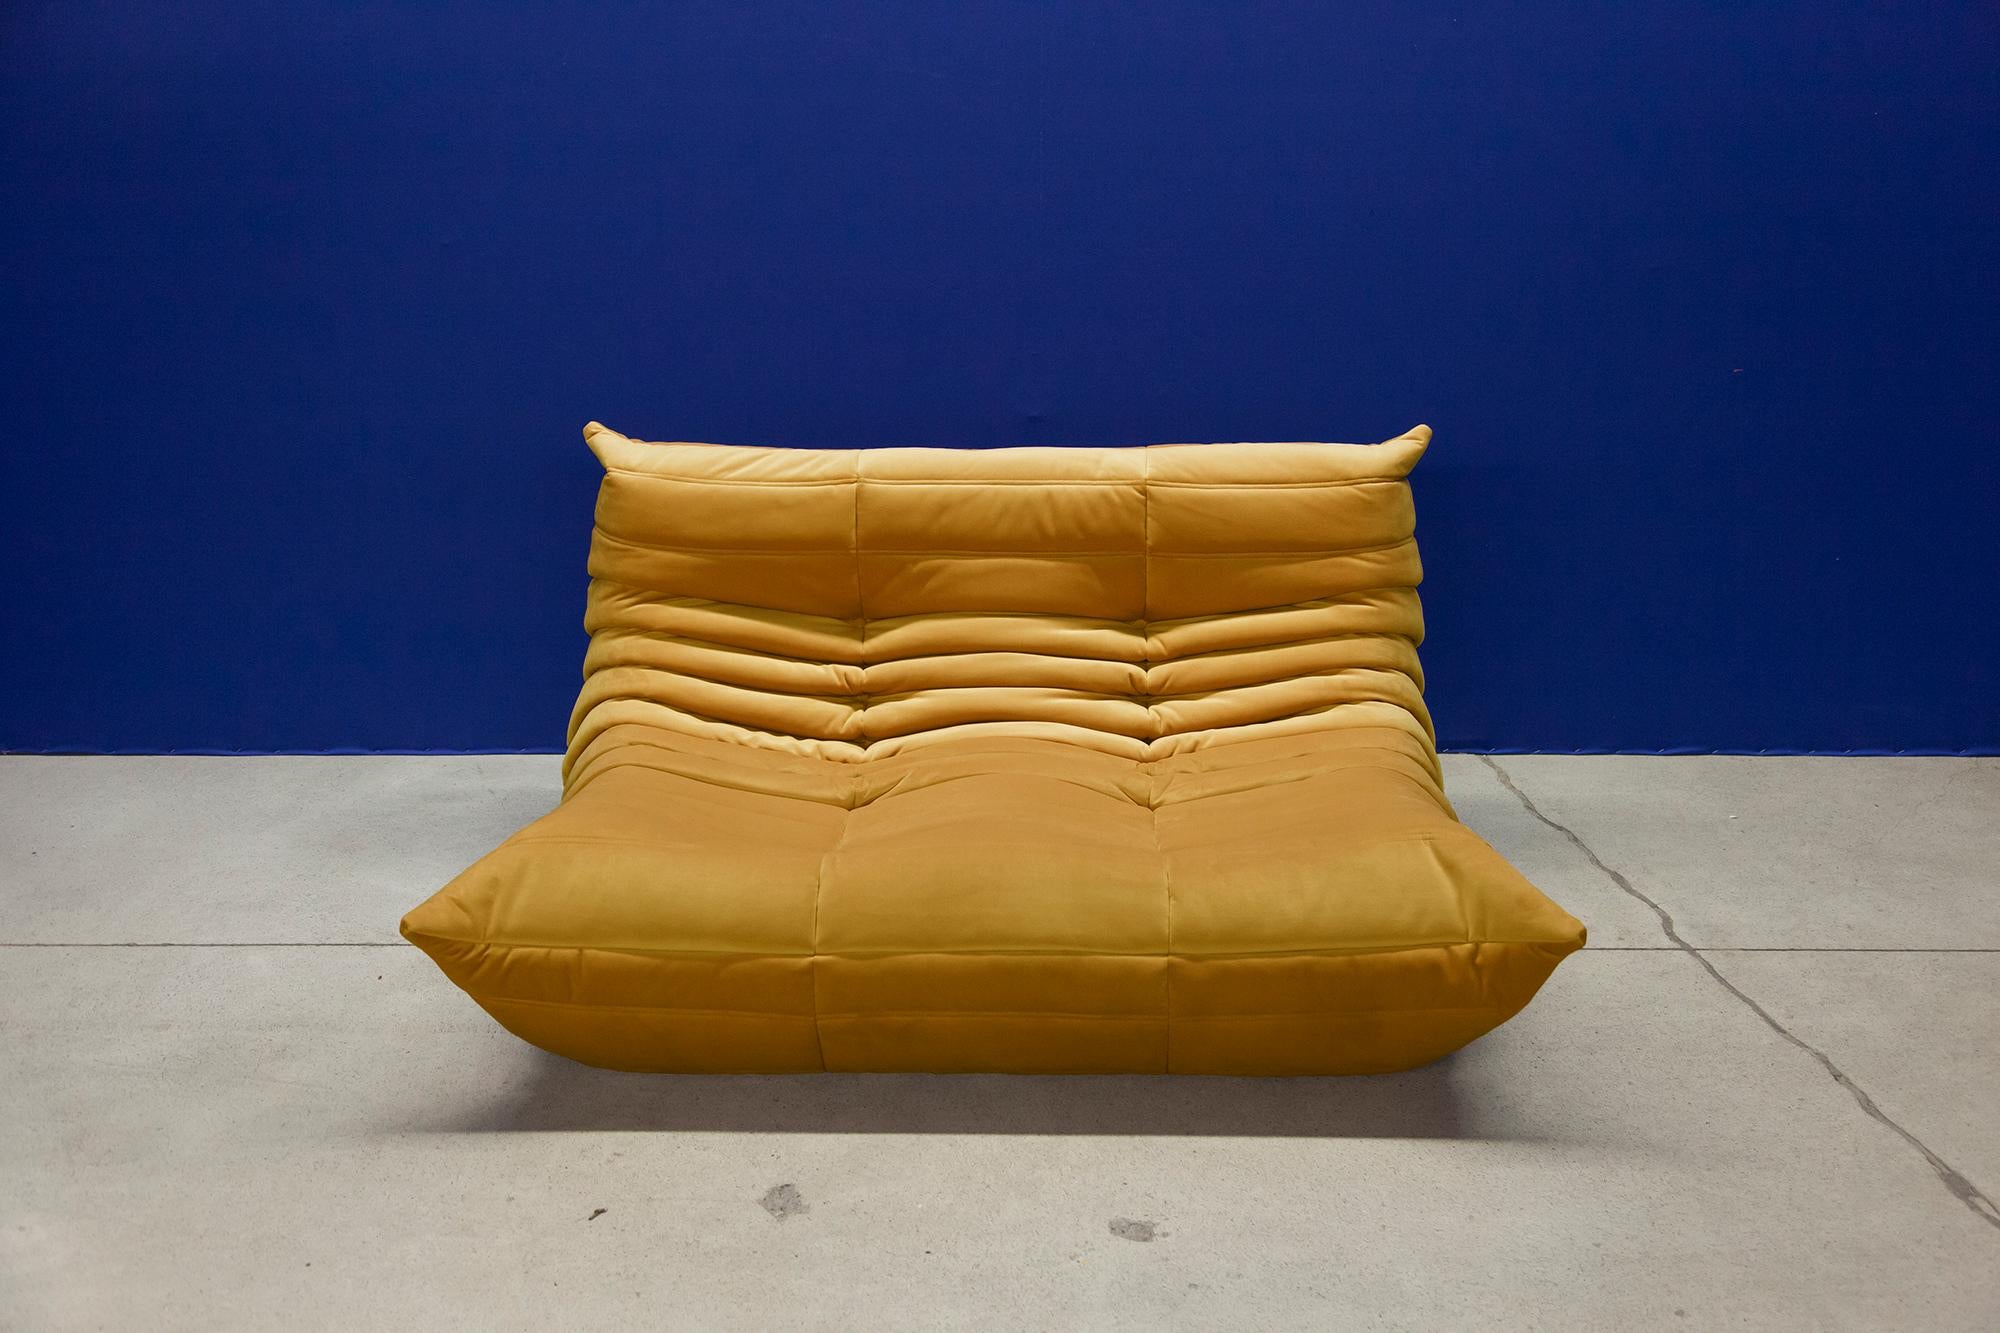 This two-seat Togo couch was designed by Michel Ducaroy in 1973 and was manufactured by Ligne Roset in France. It has been reupholstered in new golden yellow velvet (131 x 102 x 70 cm). It has the original Ligne Roset logo and genuine Ligne Roset